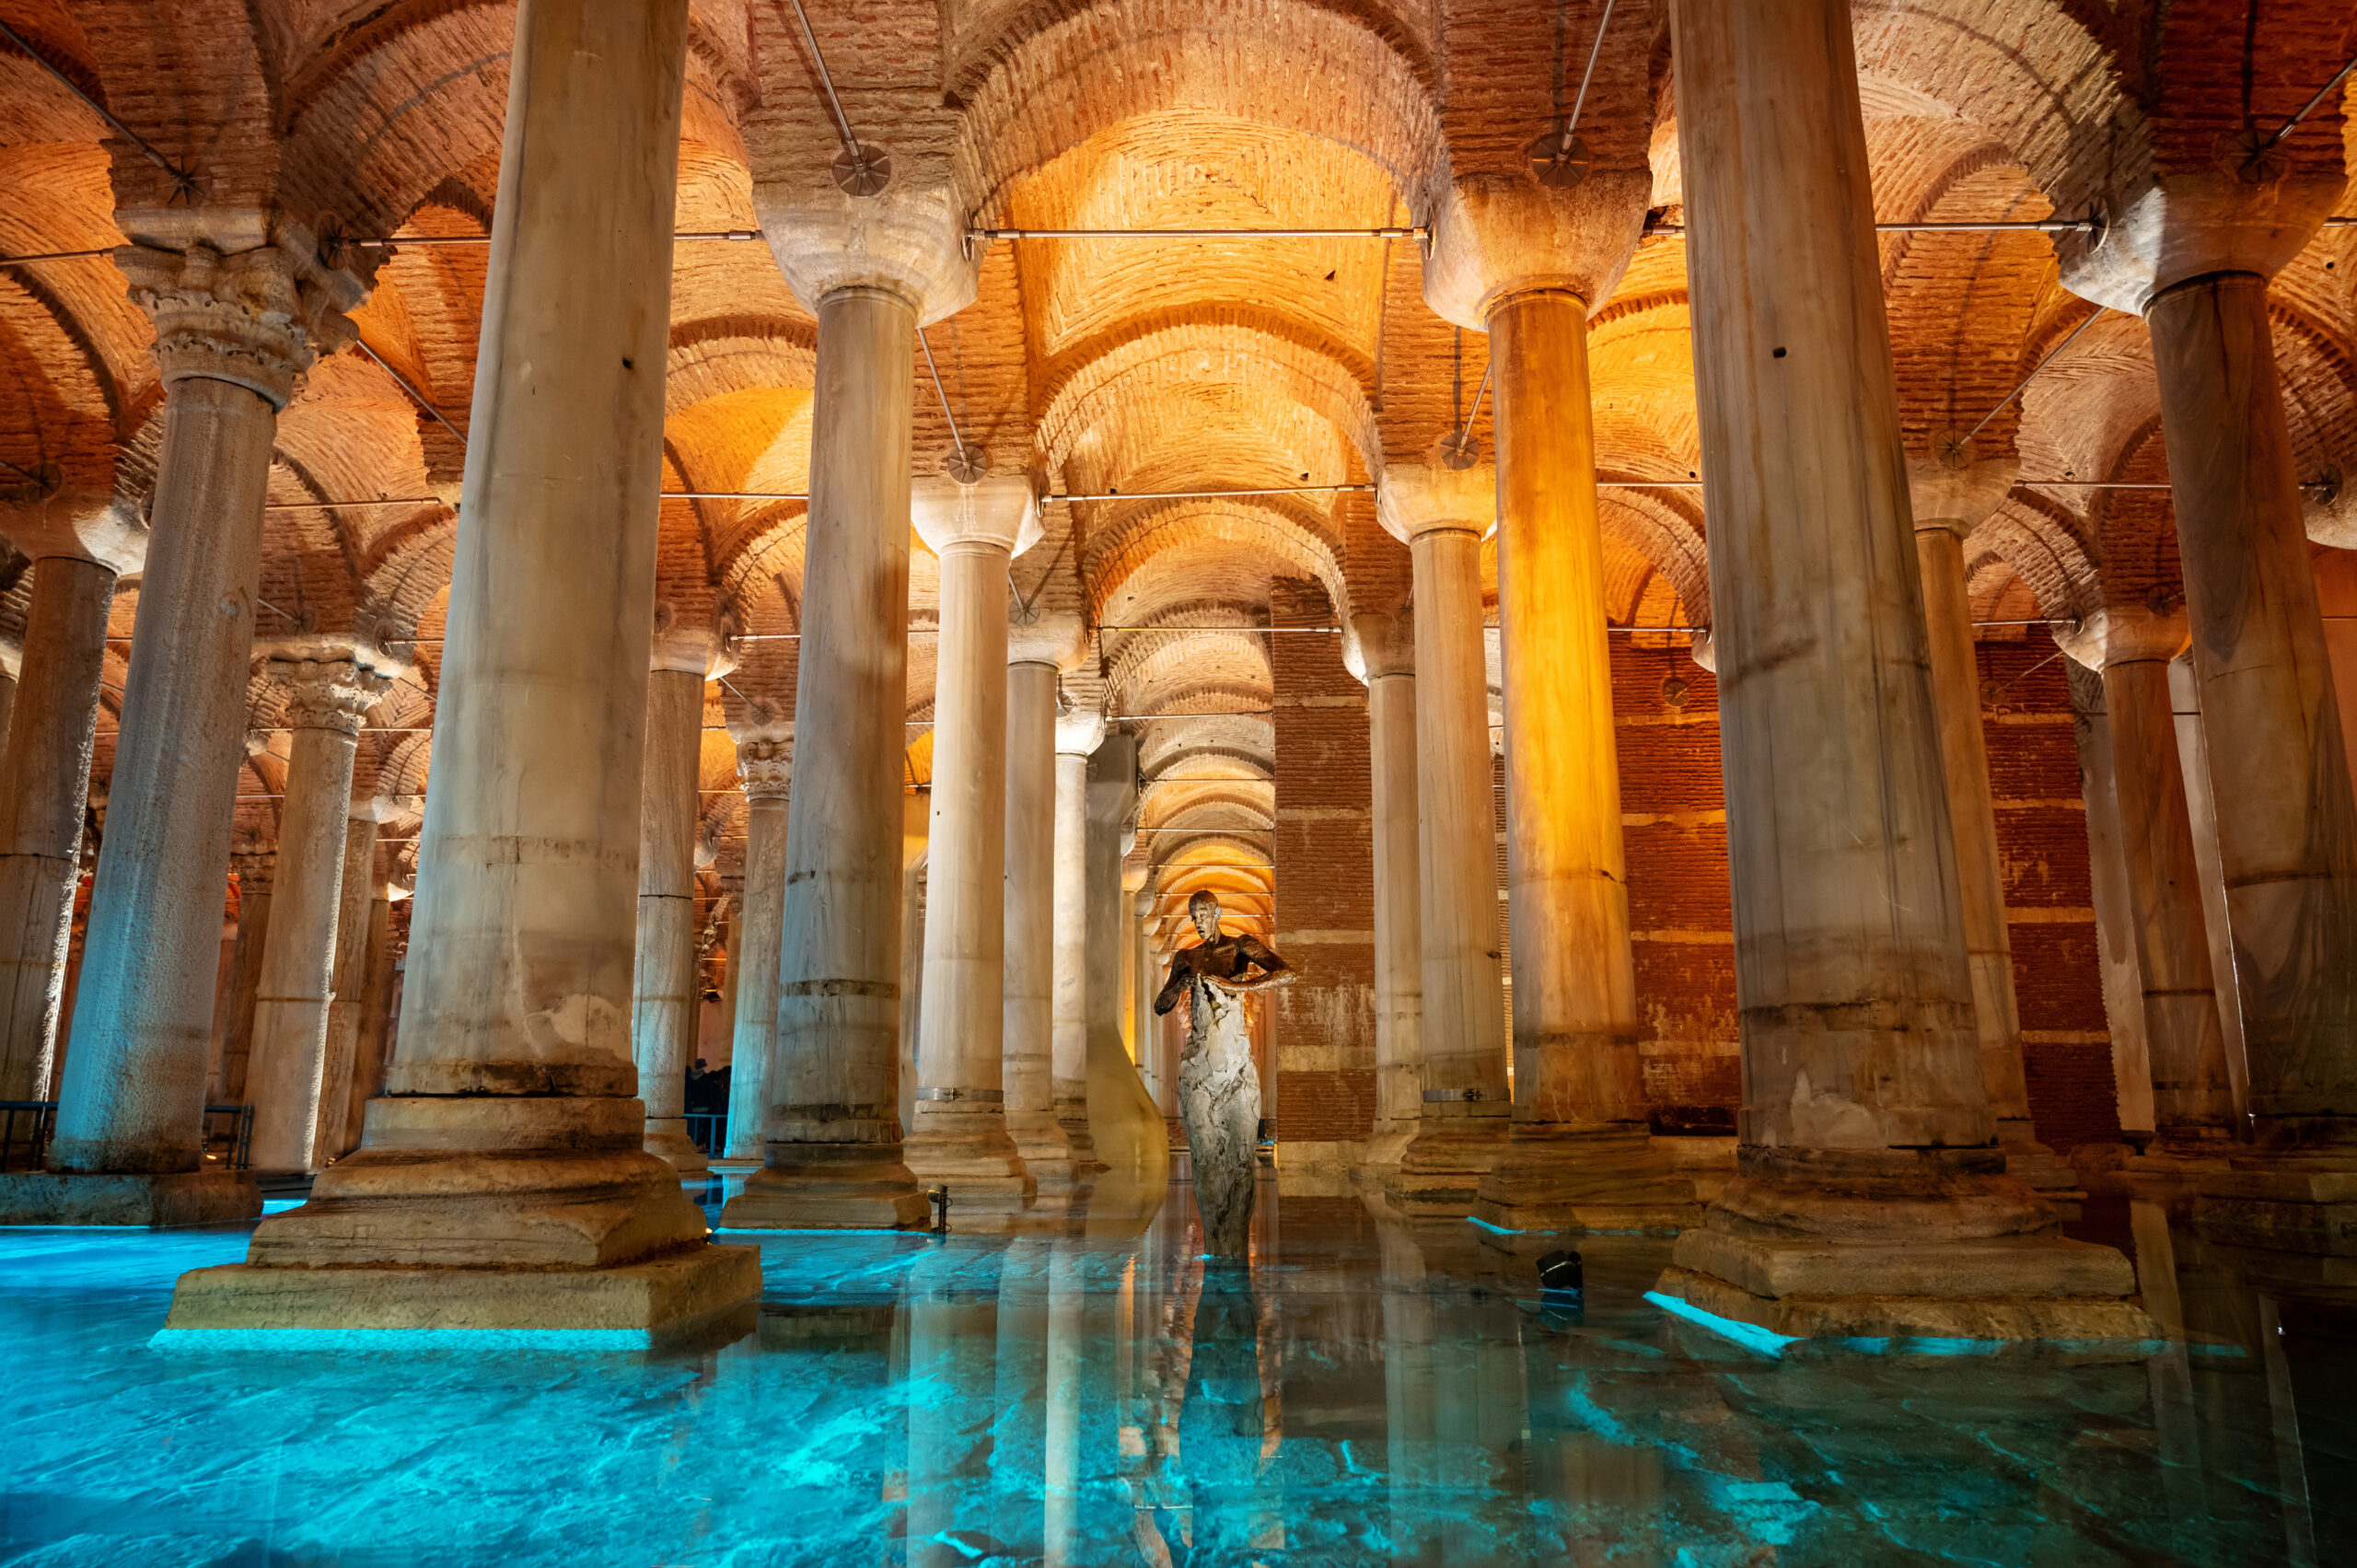 Interior view of the Basilica Cistern in Istanbul, Turkey. Ancient columns, water, illumination